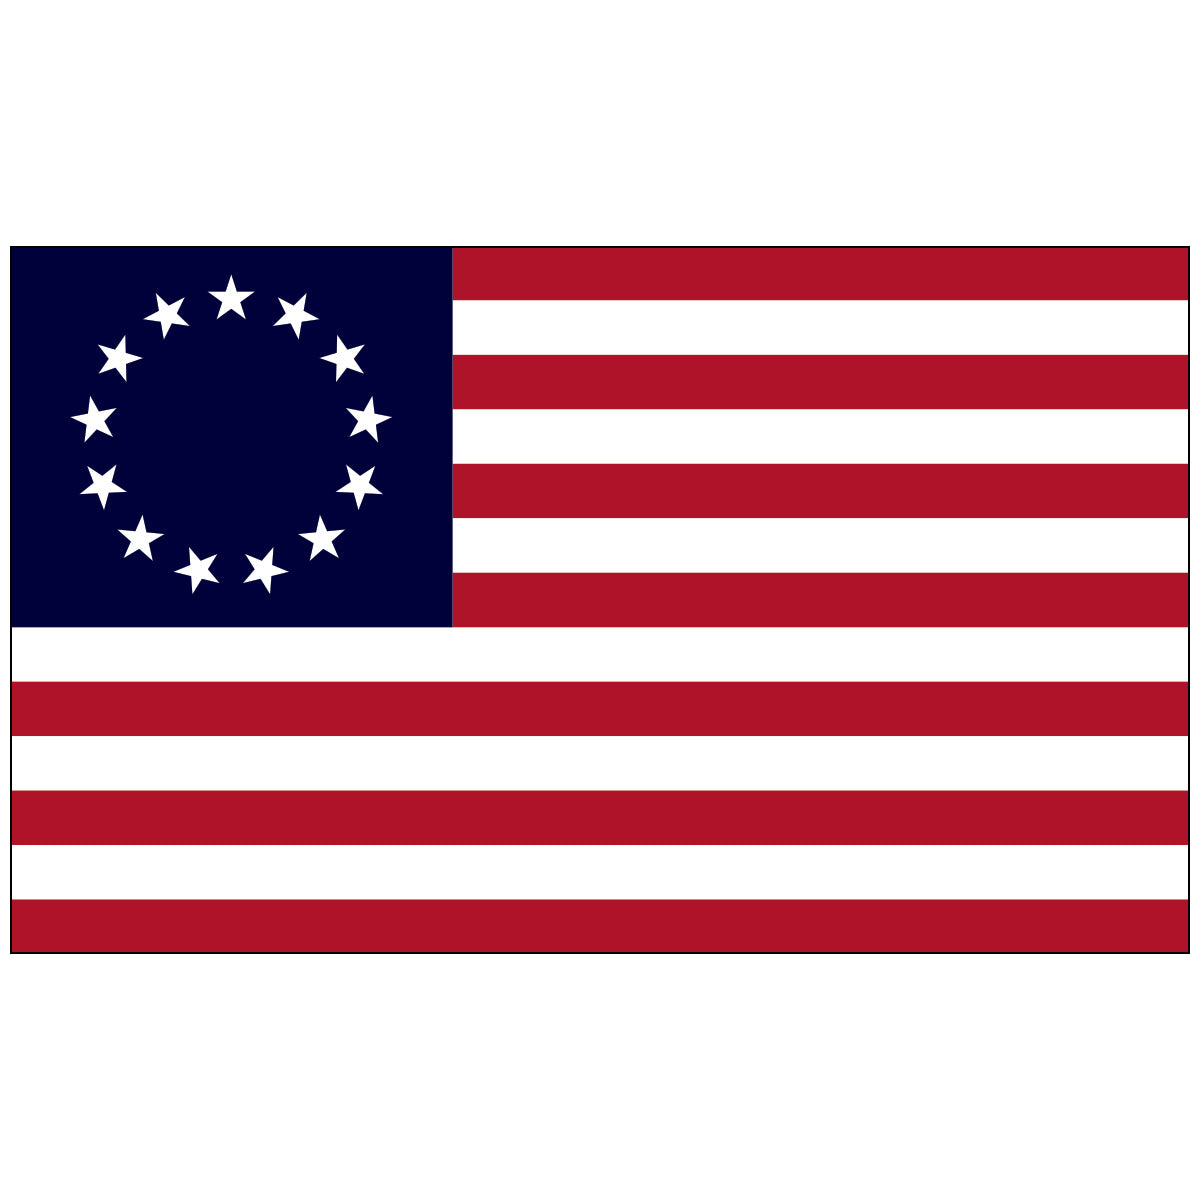 Betsy-Ross-Historical-Flag-13-satrs-13-stripes-Flagsource-Southeast-Woodstock-Ga